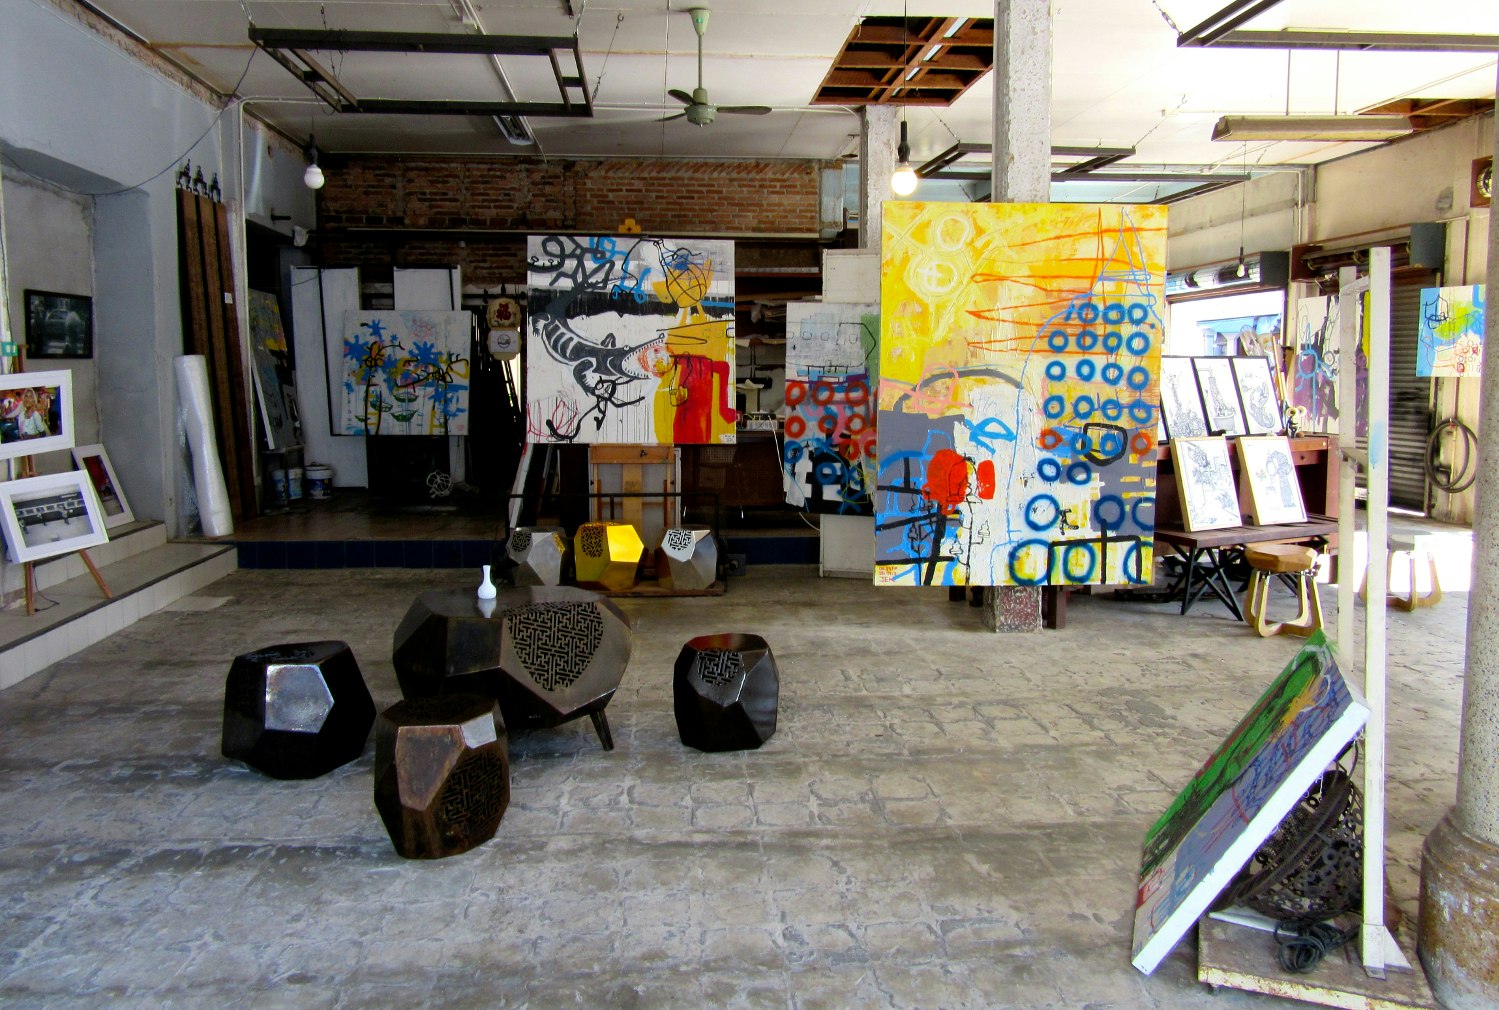 Phuket Town's Drawing Room gallery has a street art vibe © Isabella Noble / Lonely Planet